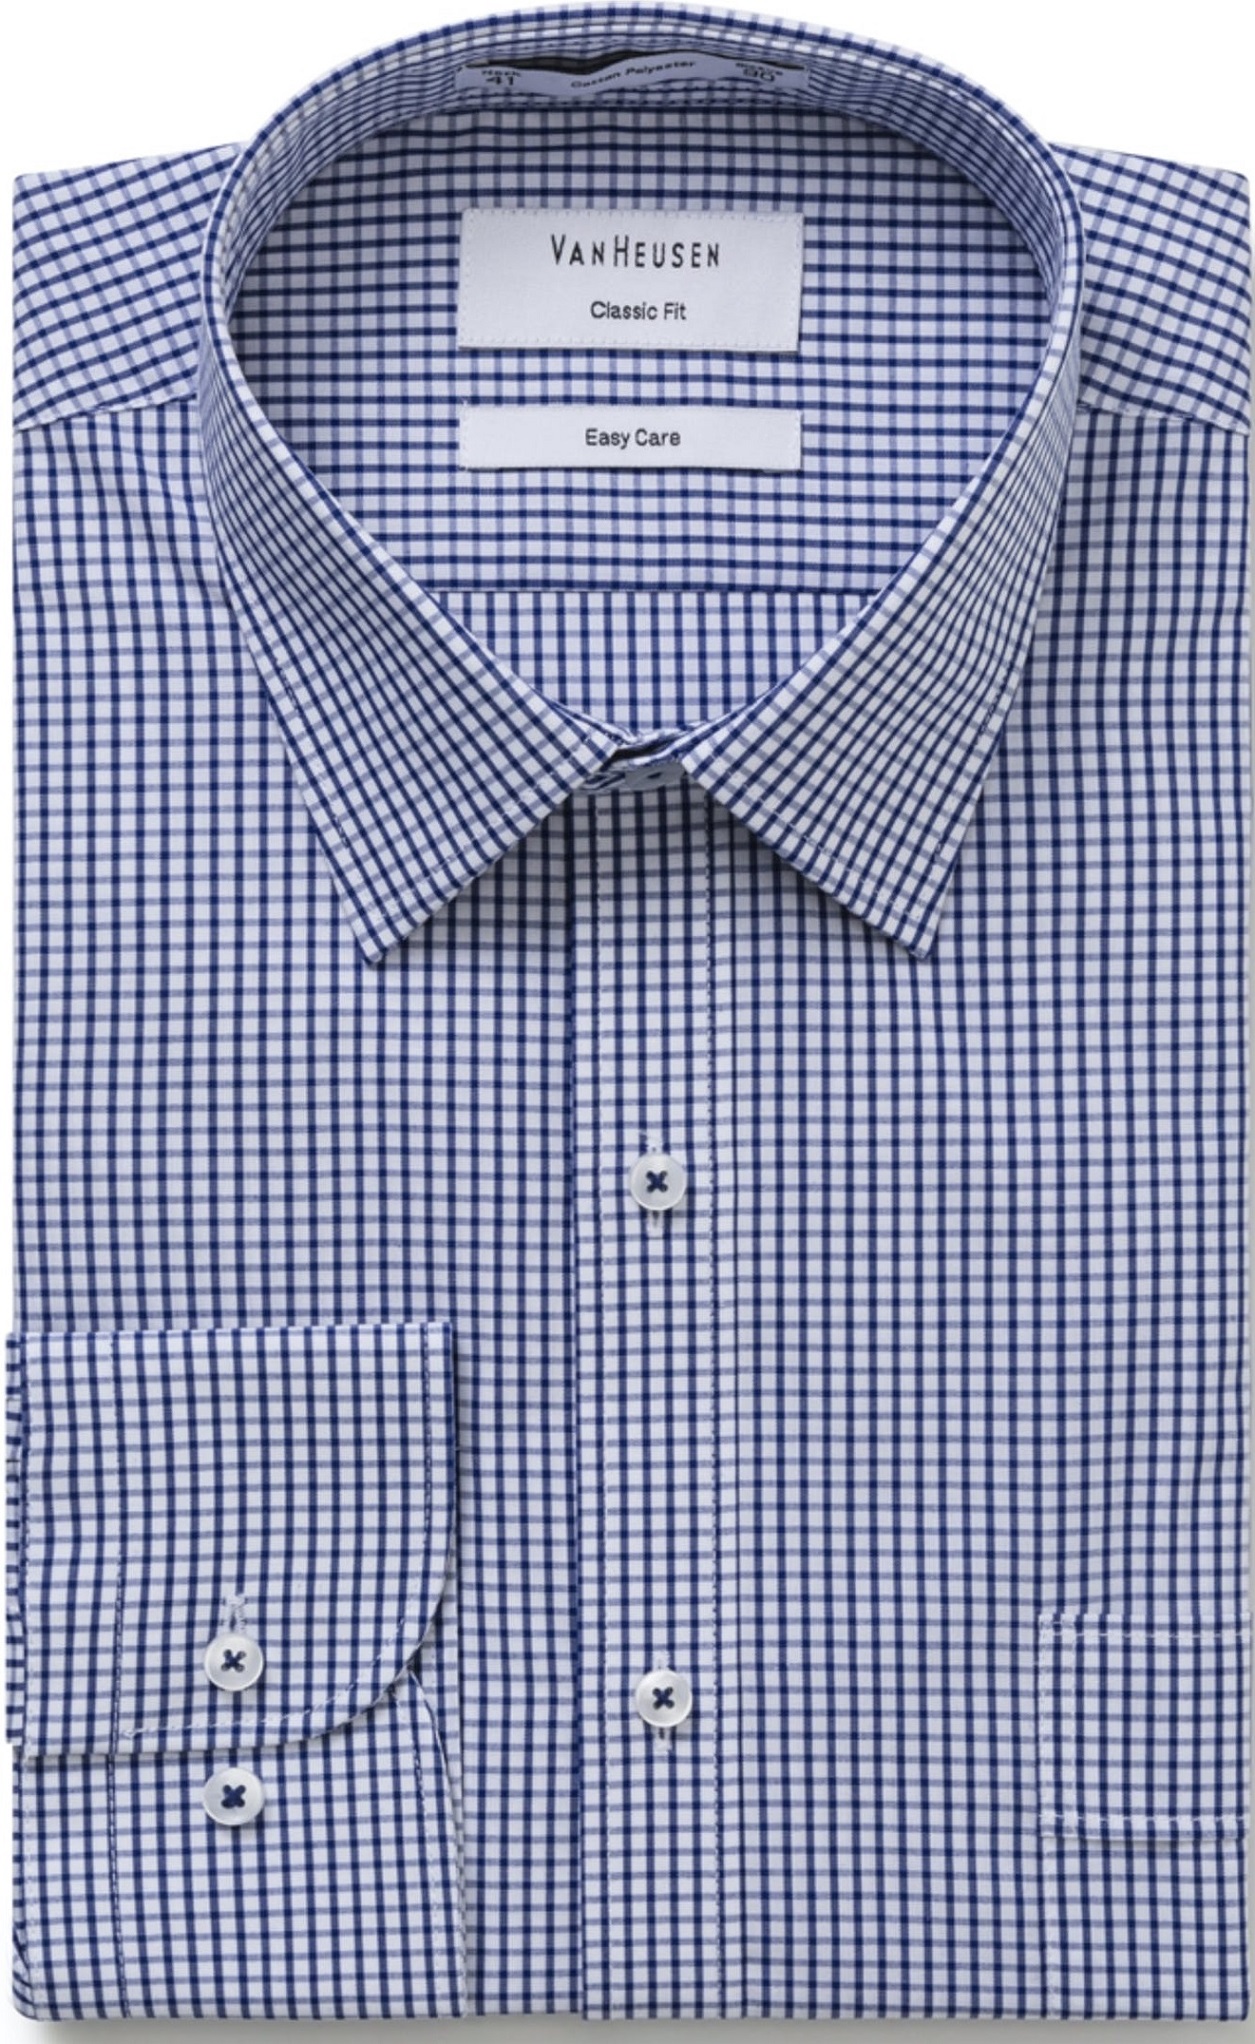 How to buy the perfect business shirt? - Blog